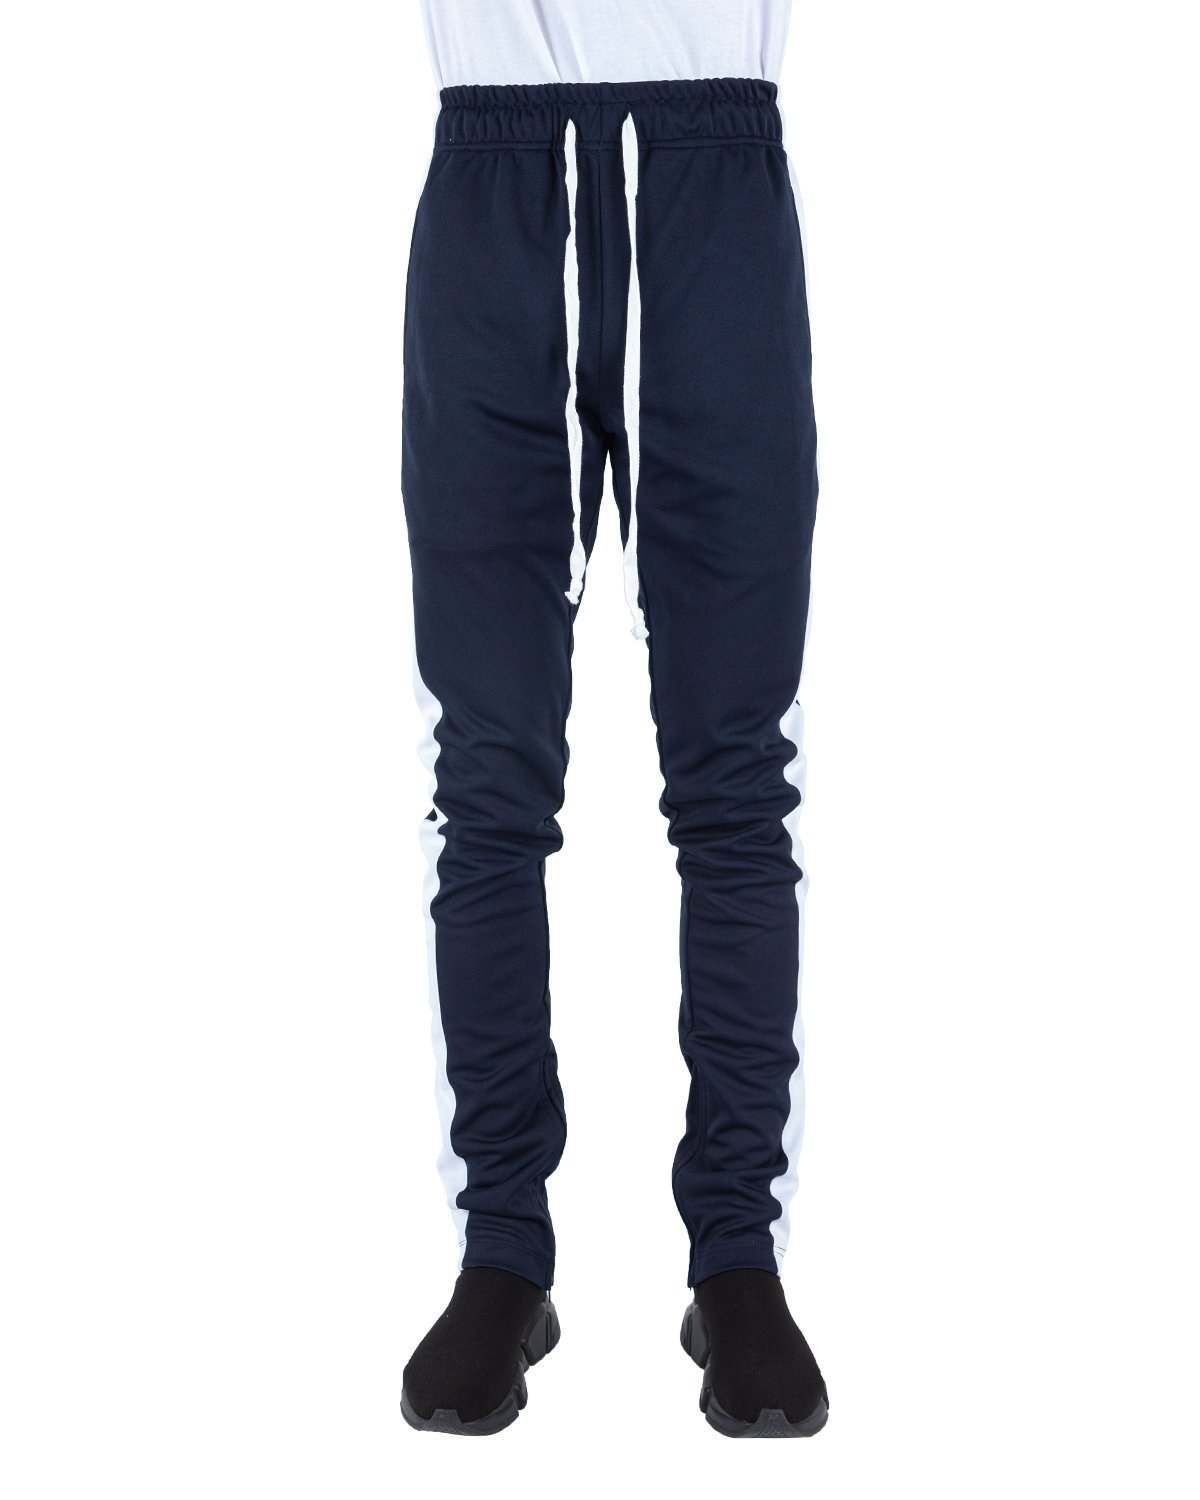 Track Pants XL / Navy and White